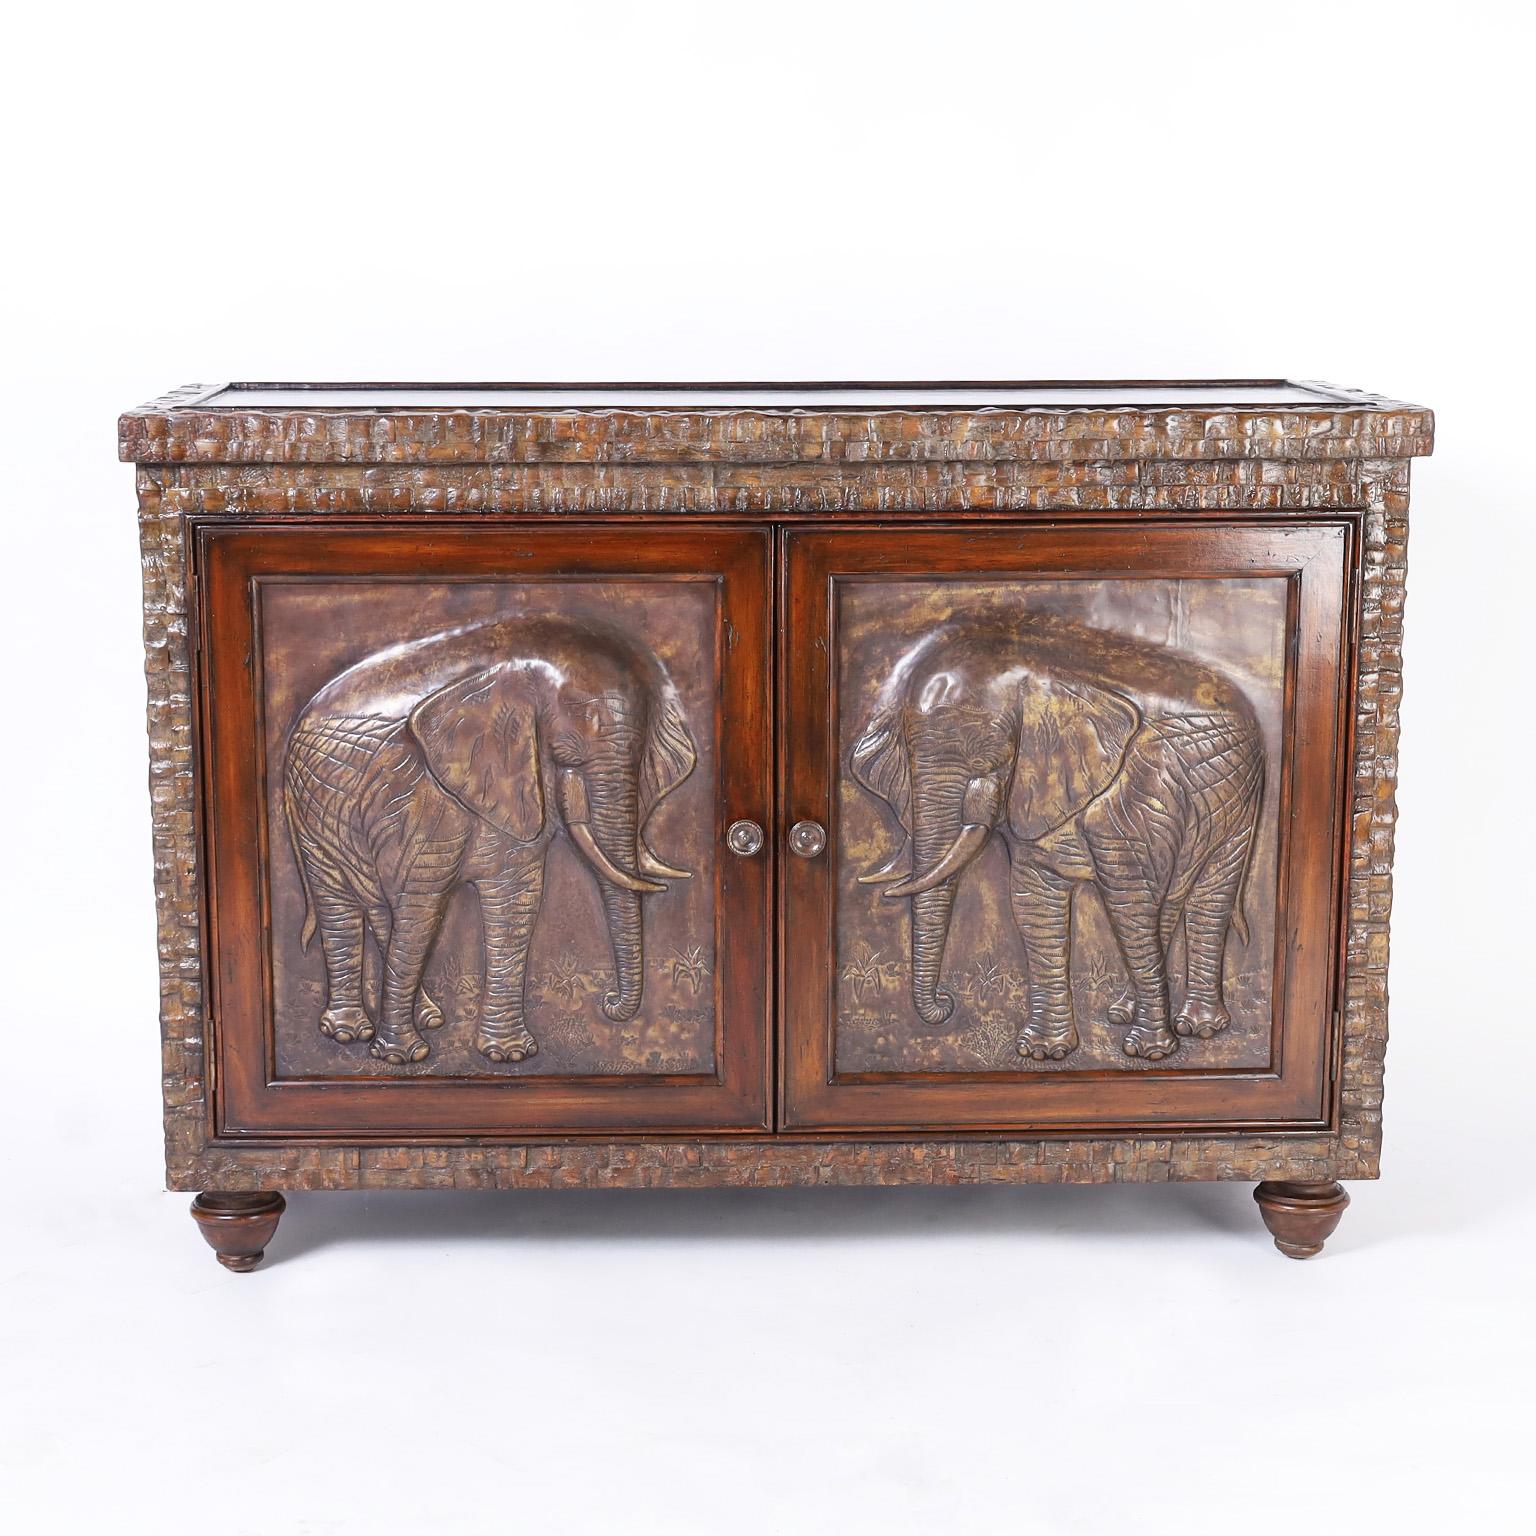 Handsome vintage British colonial style cabinet or chest with a polished coconut frame, featuring tooled leather top and sides, two mahogany doors with bronze elephant reliefs, mahogany interior with two drawers and turned feet. Signed